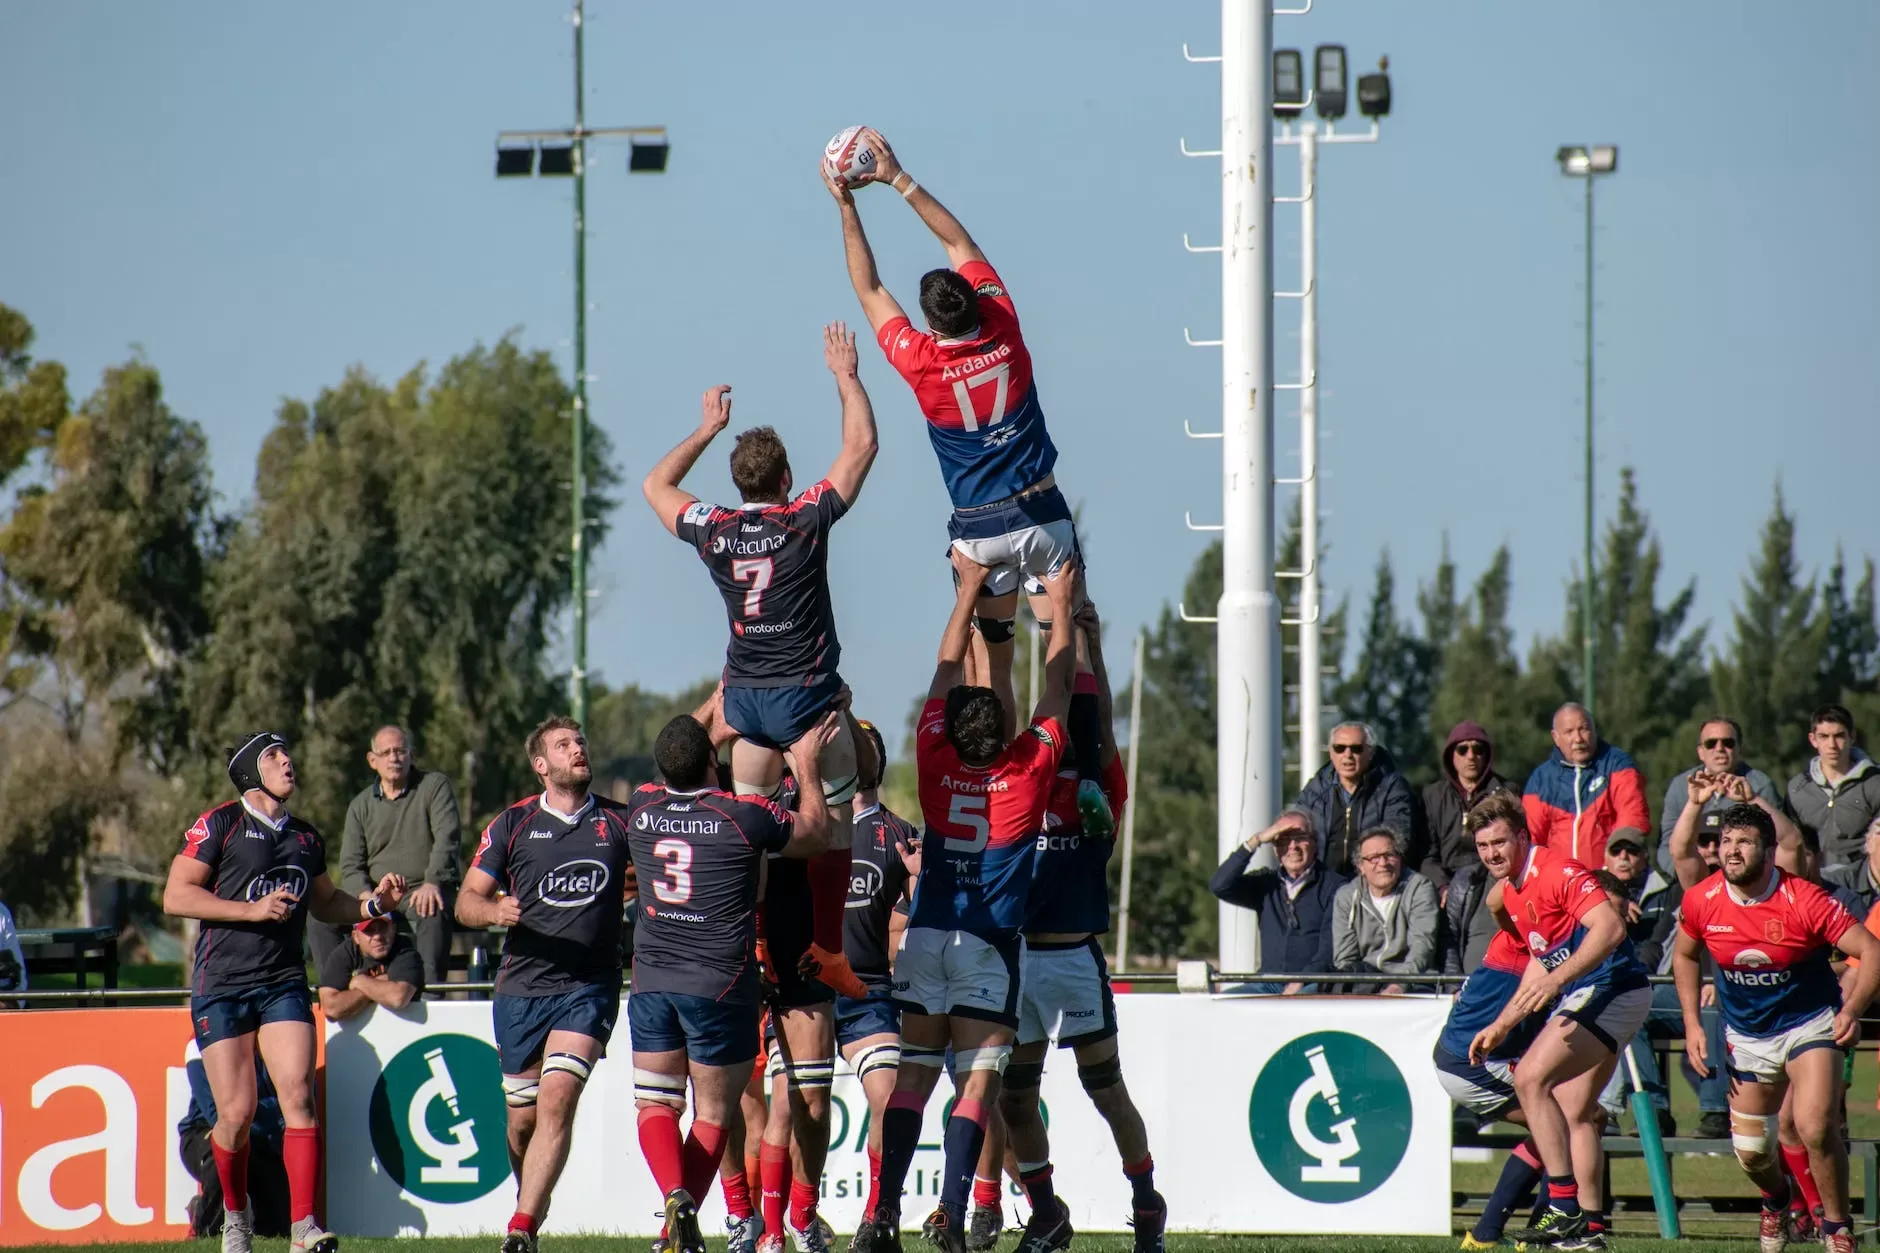 Lineout Basics: How to Win the Ball